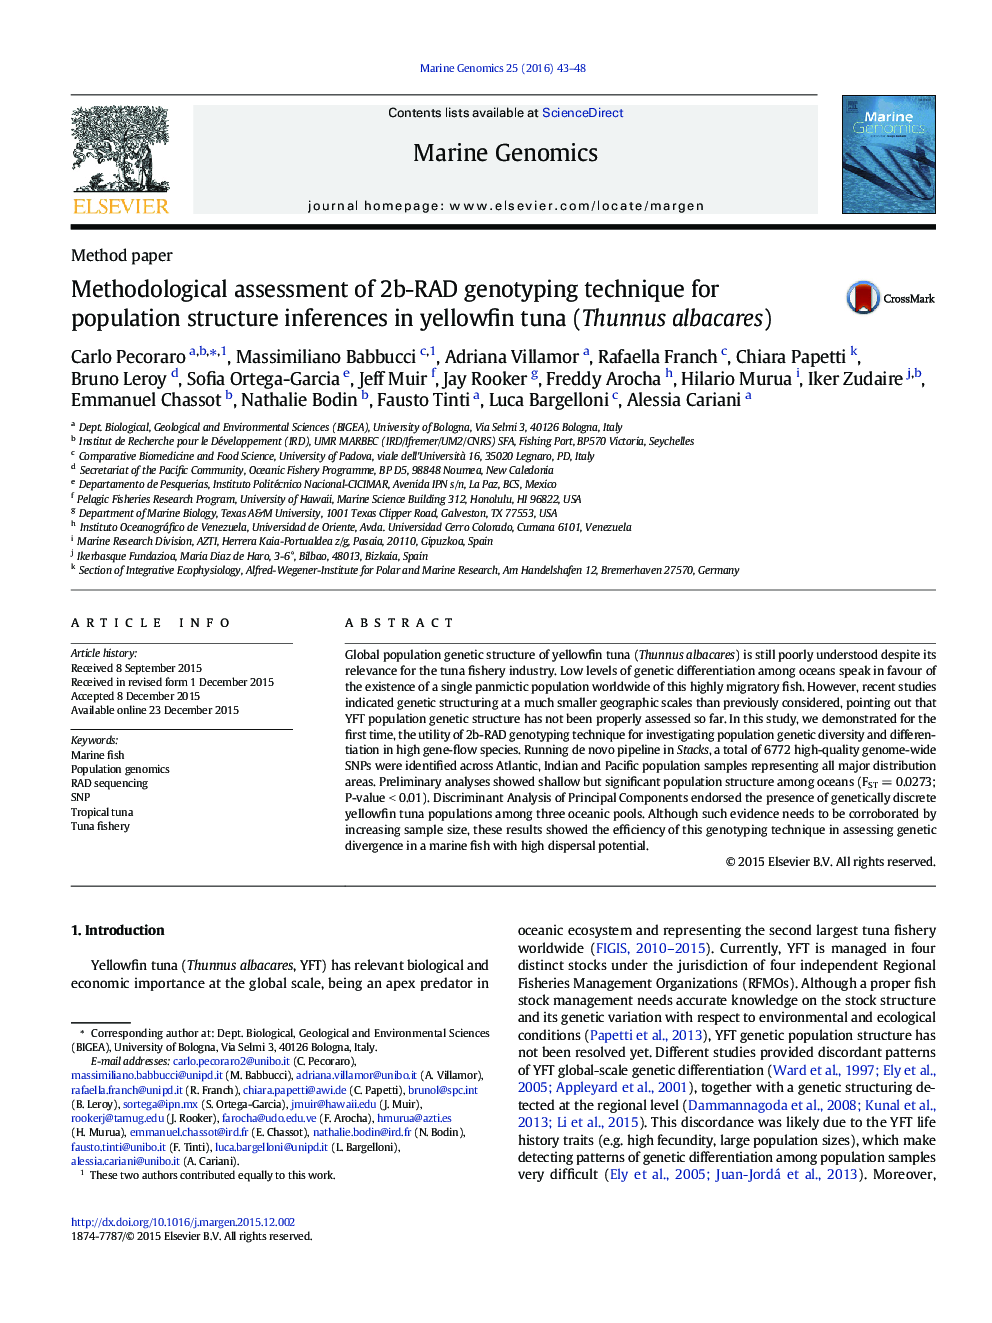 Methodological assessment of 2b-RAD genotyping technique for population structure inferences in yellowfin tuna (Thunnus albacares)